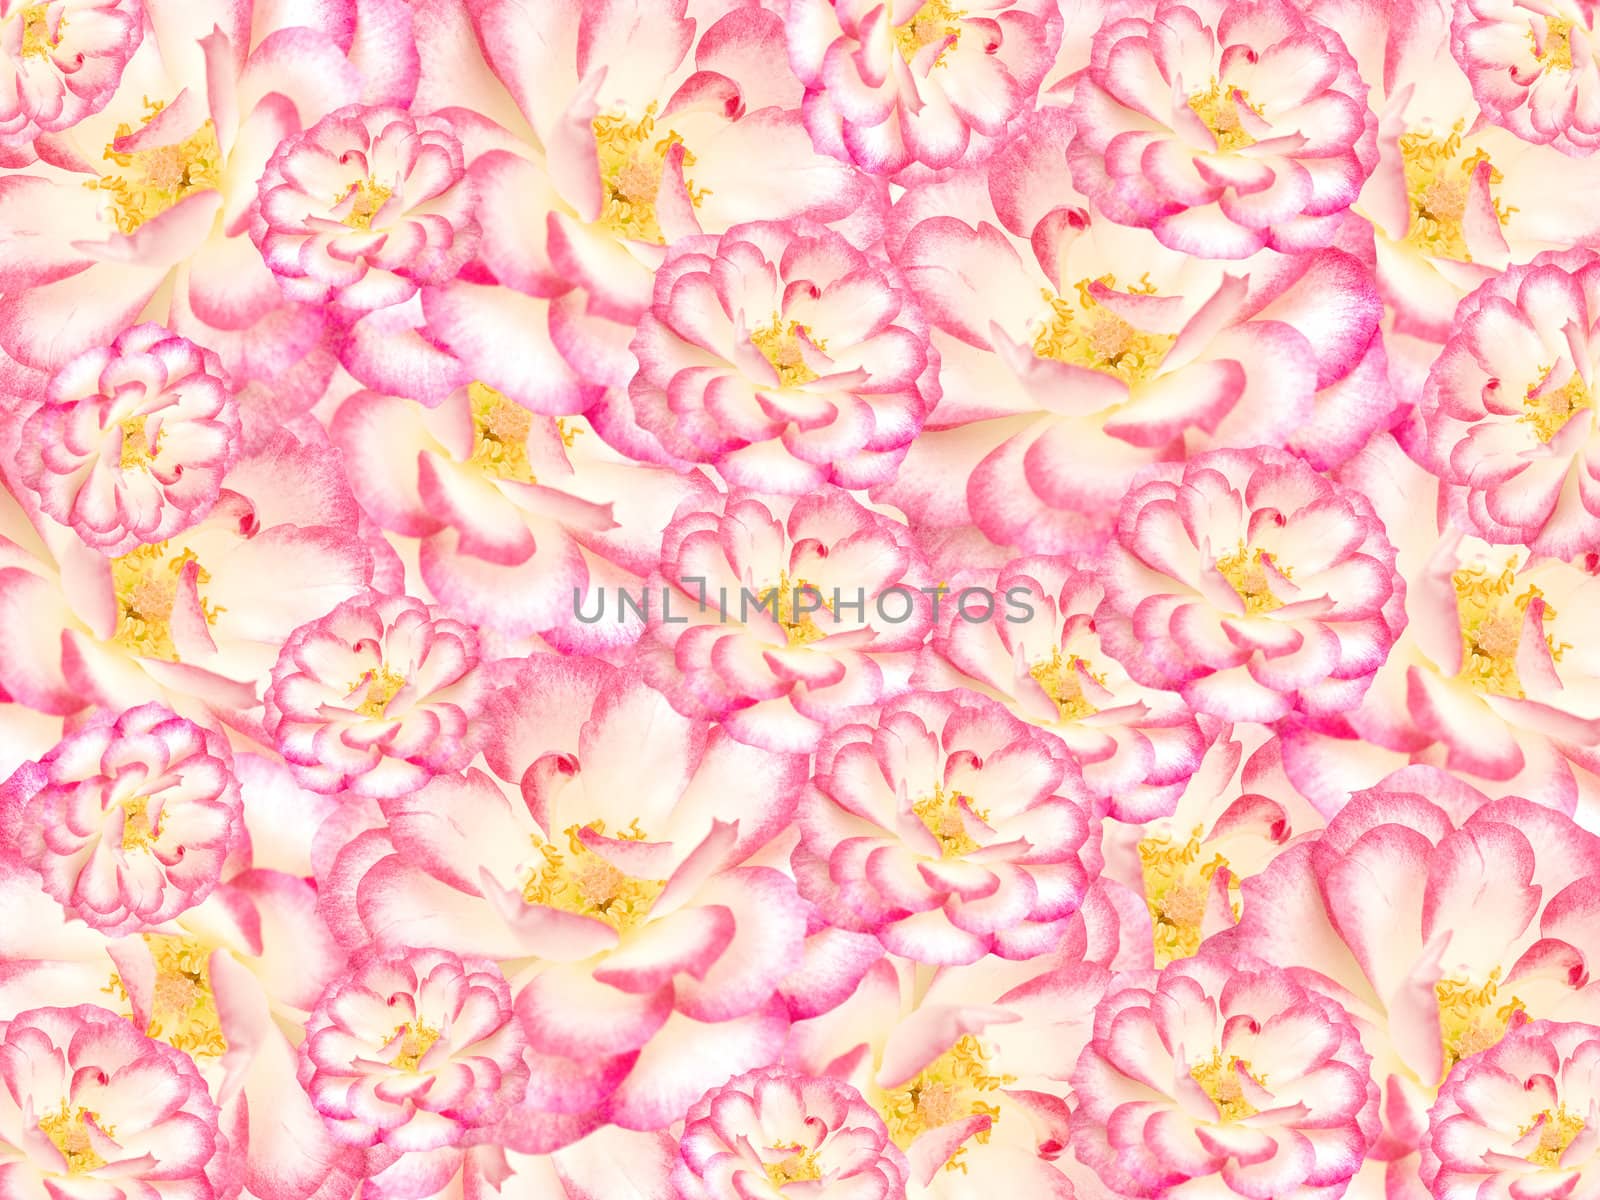 floral textured background, pink white and yellow flowers in array